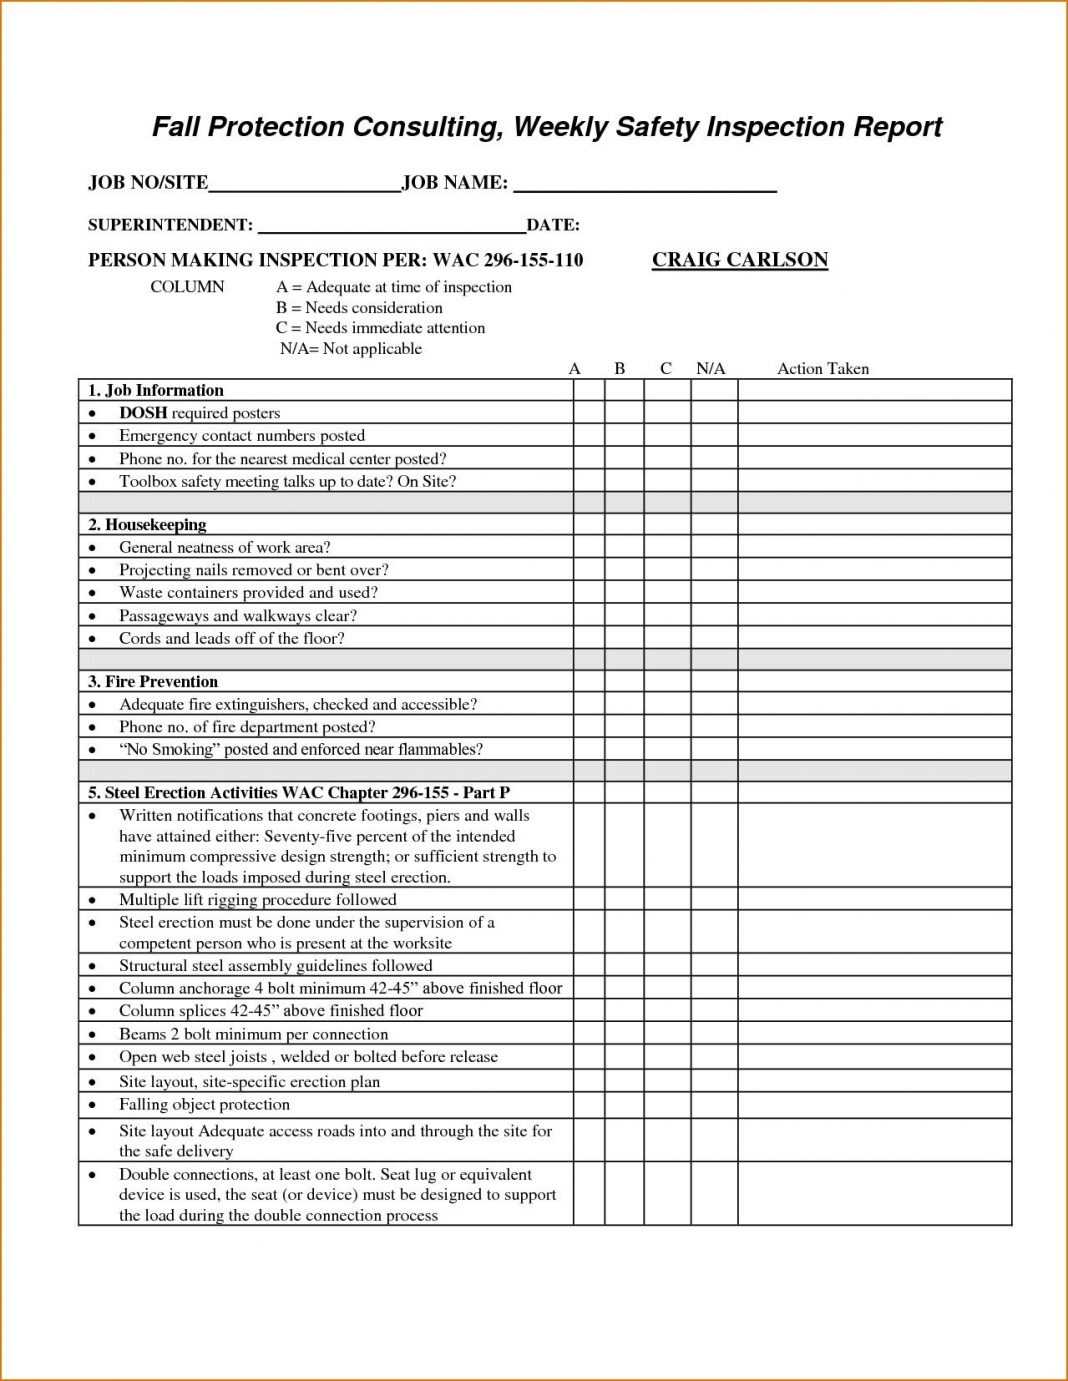 Roof Report Template Tezat Refinedtraveler Co Flat For Roof Inspection Report Template